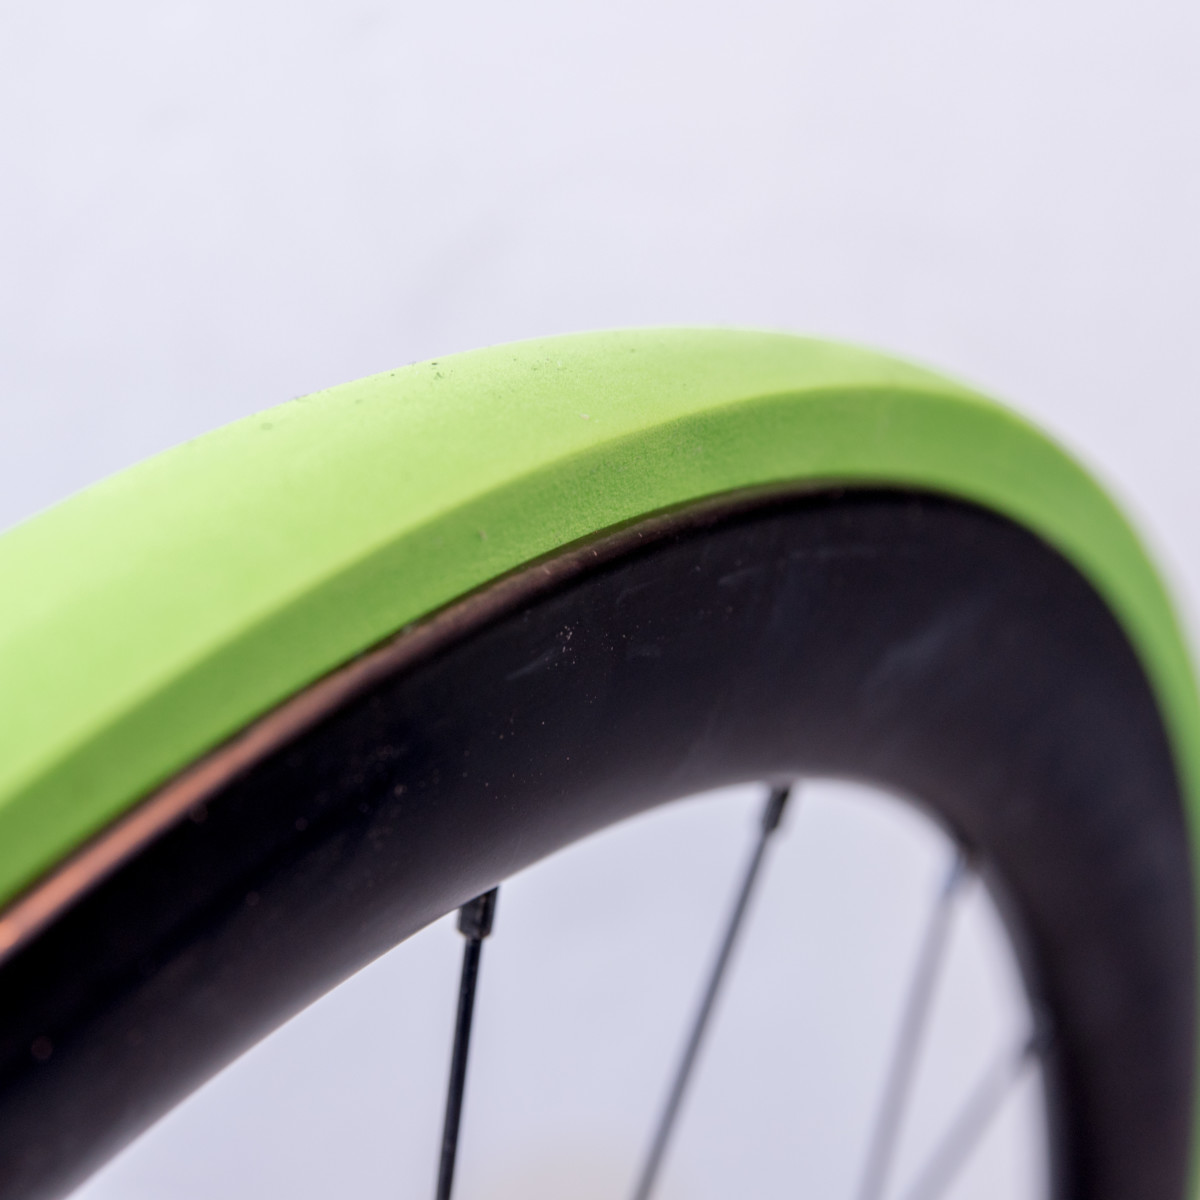 Vittoria Air-Liner Gravel Tubeless Tire Insert Review - What's the